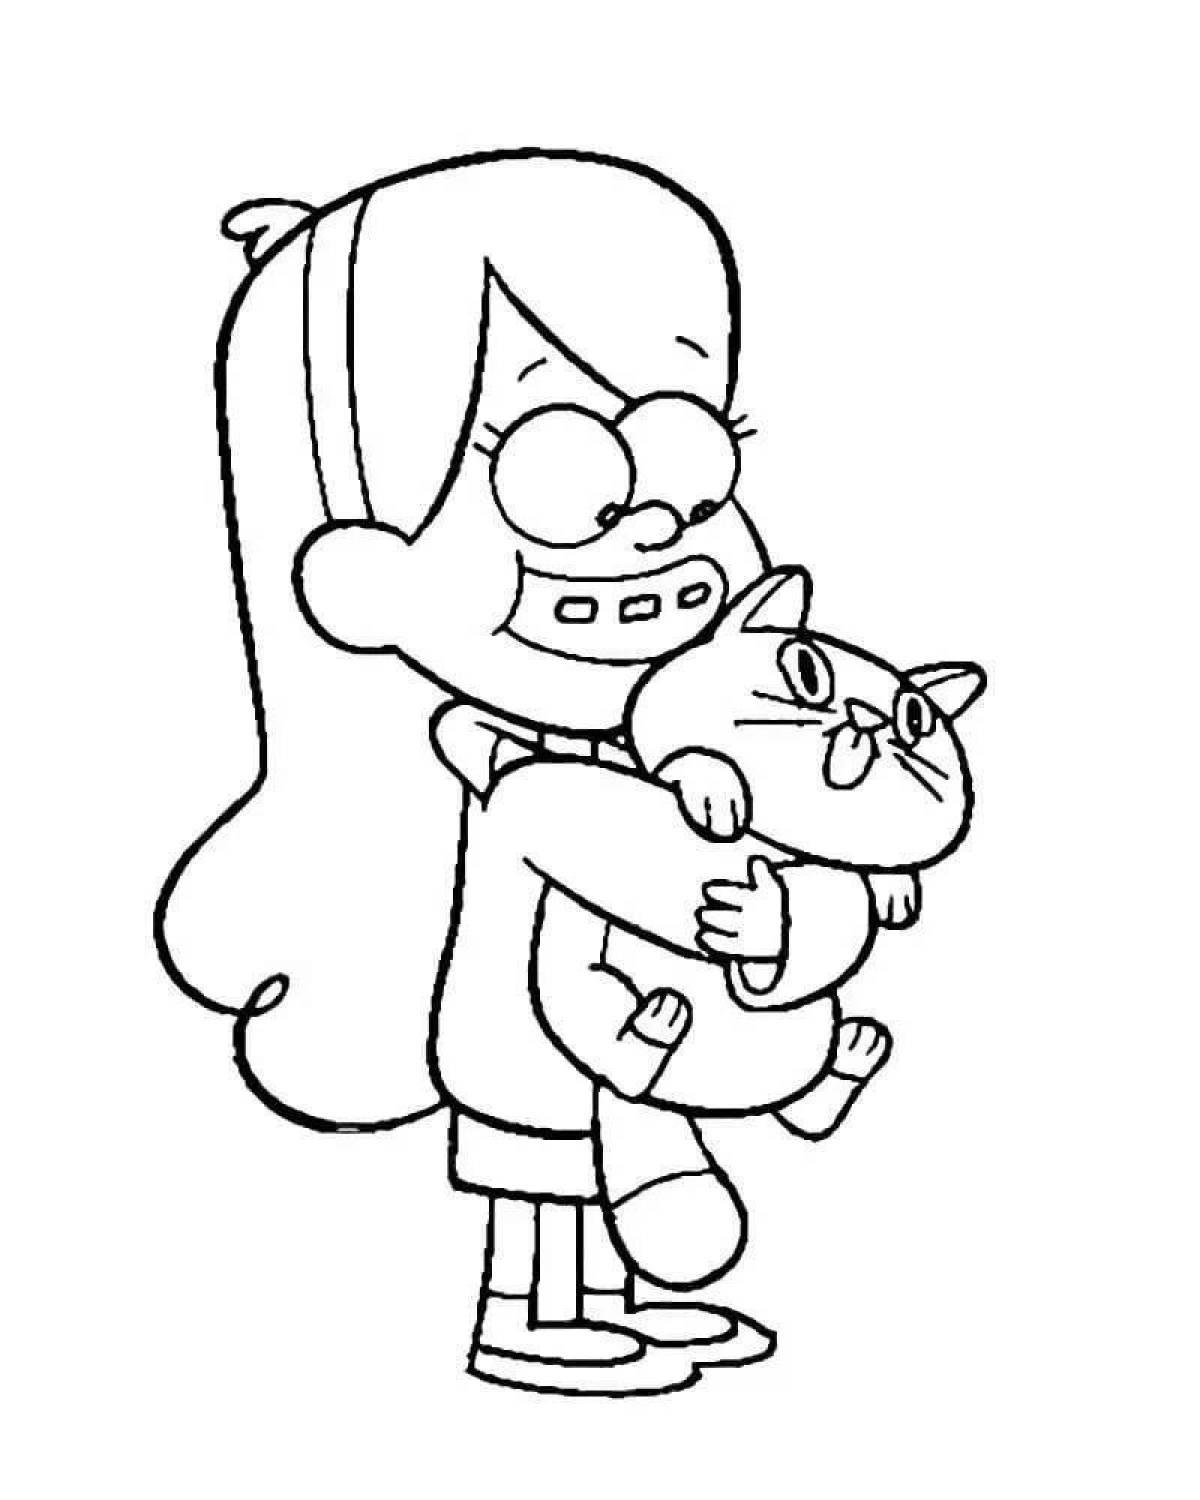 Awesome pacifica coloring page